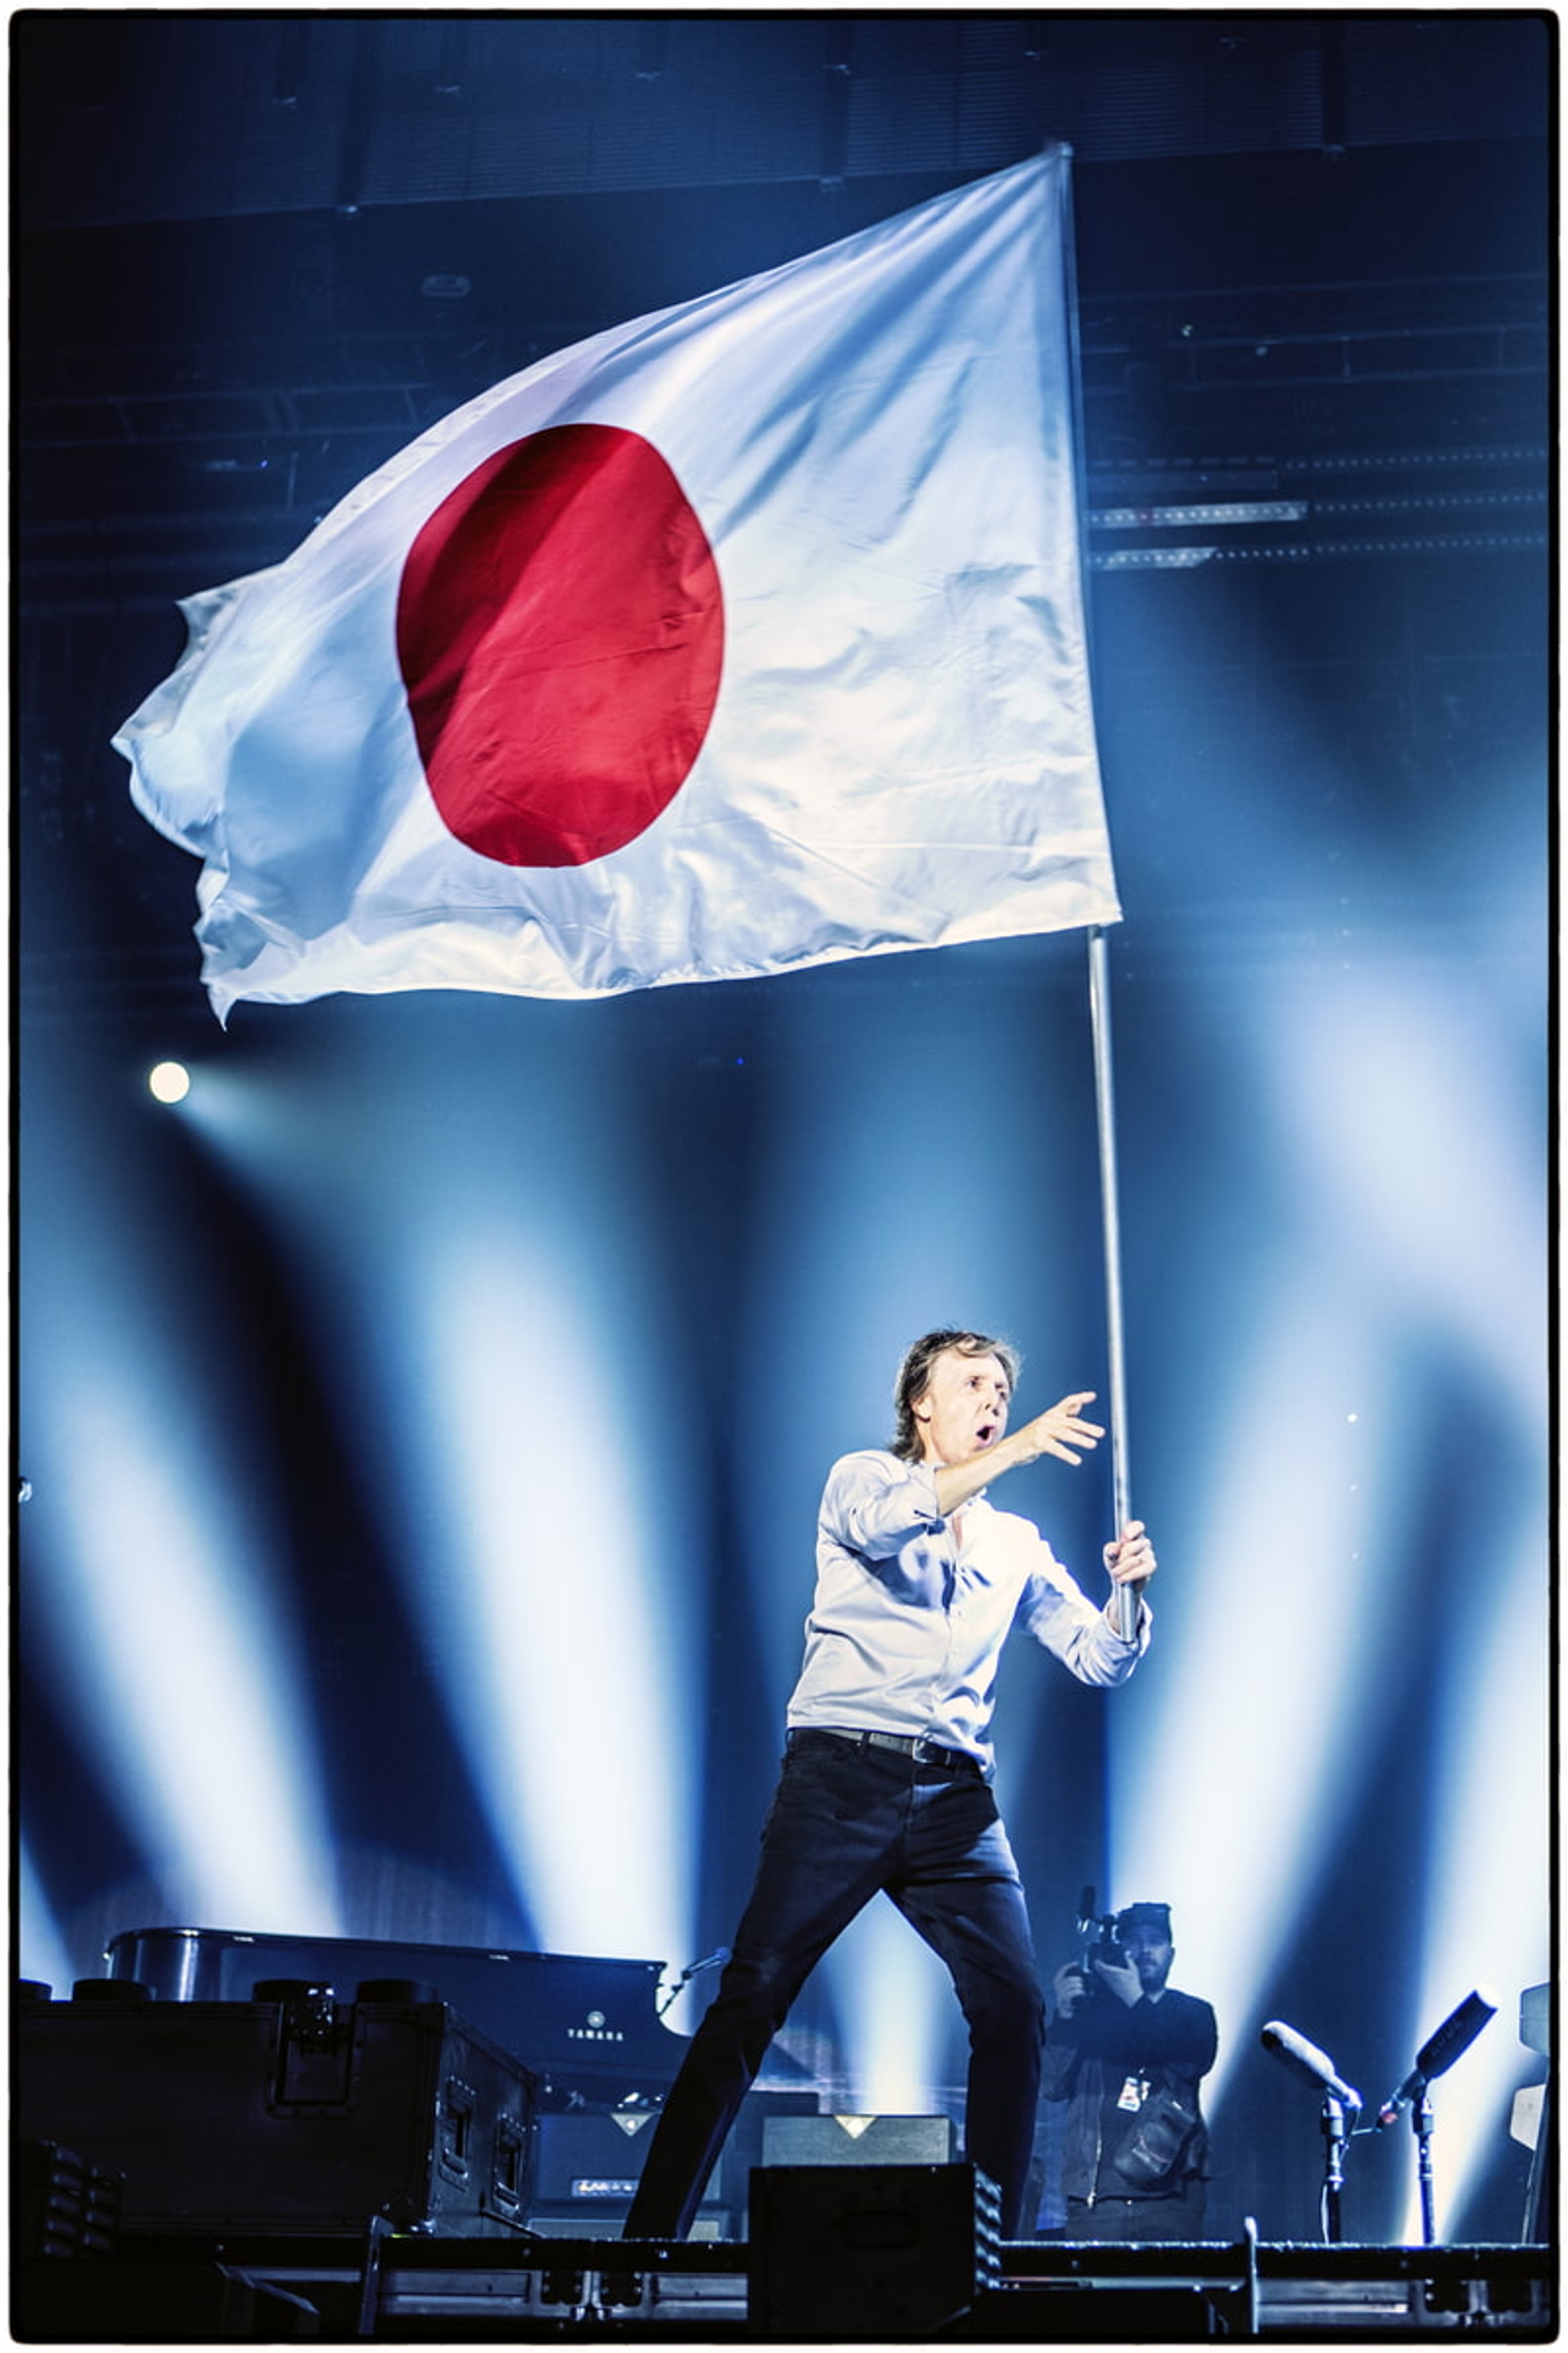 Paul on stage at the Tokyo Dome, 2017